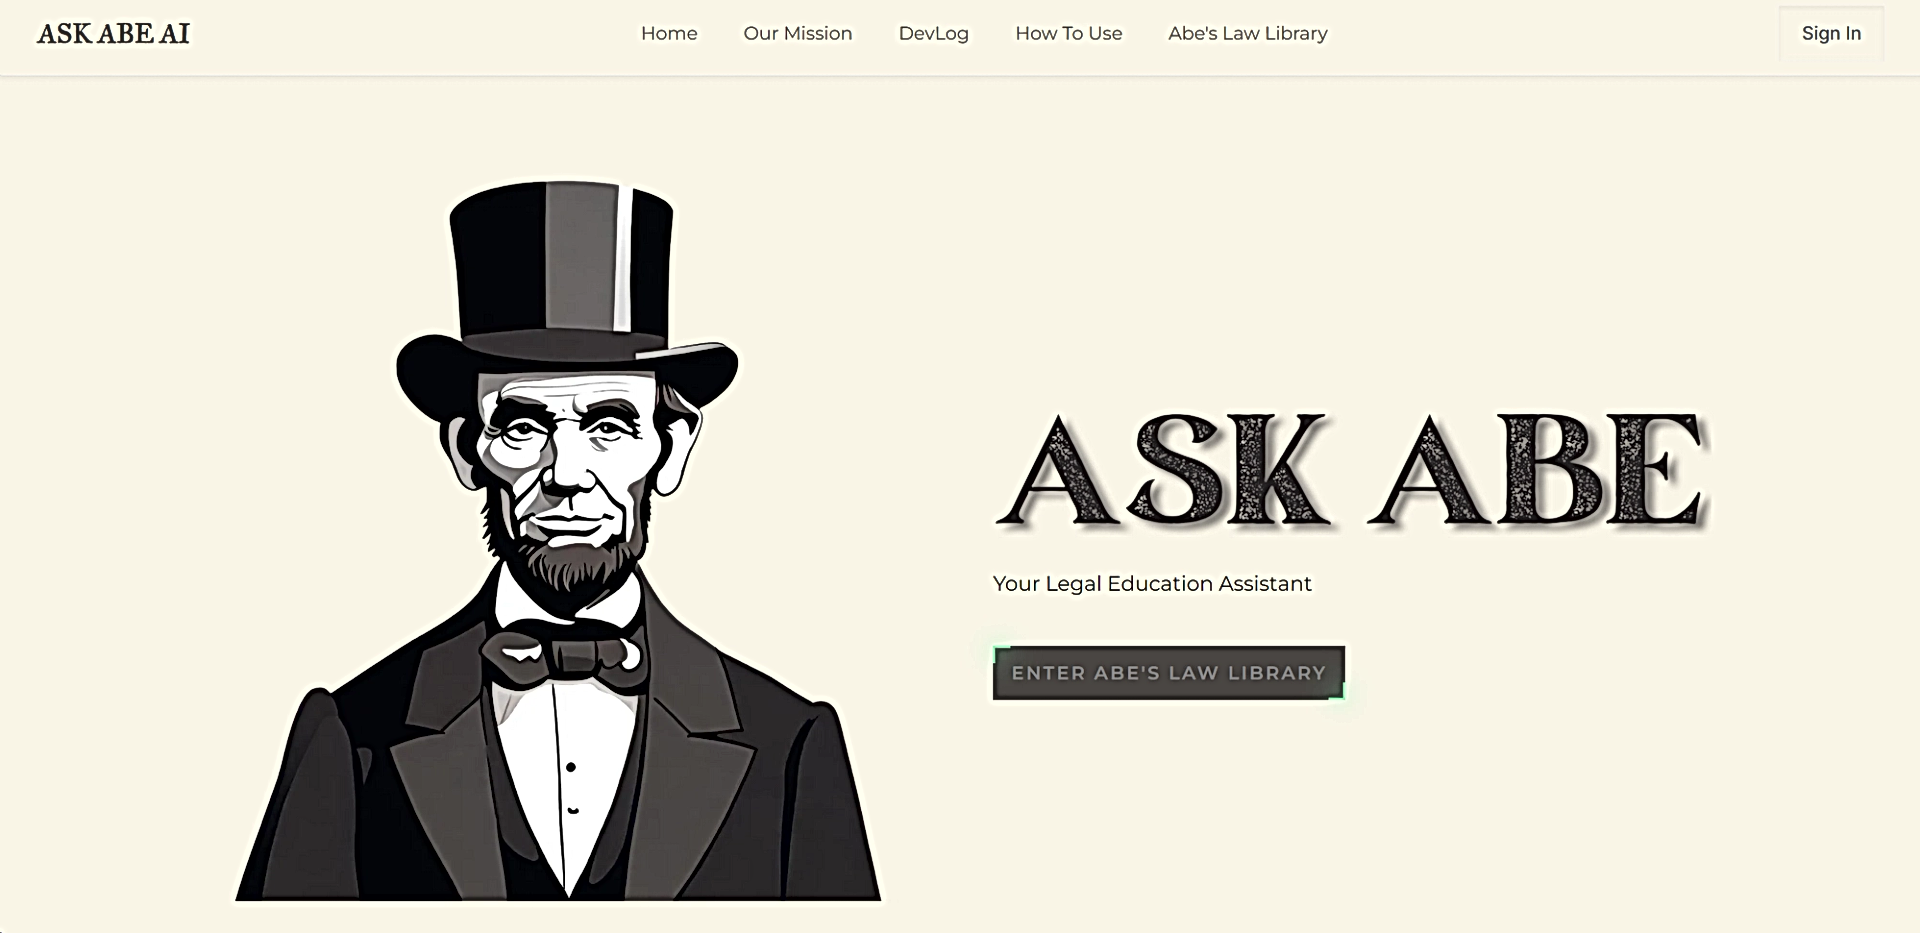 Ask Abe featured